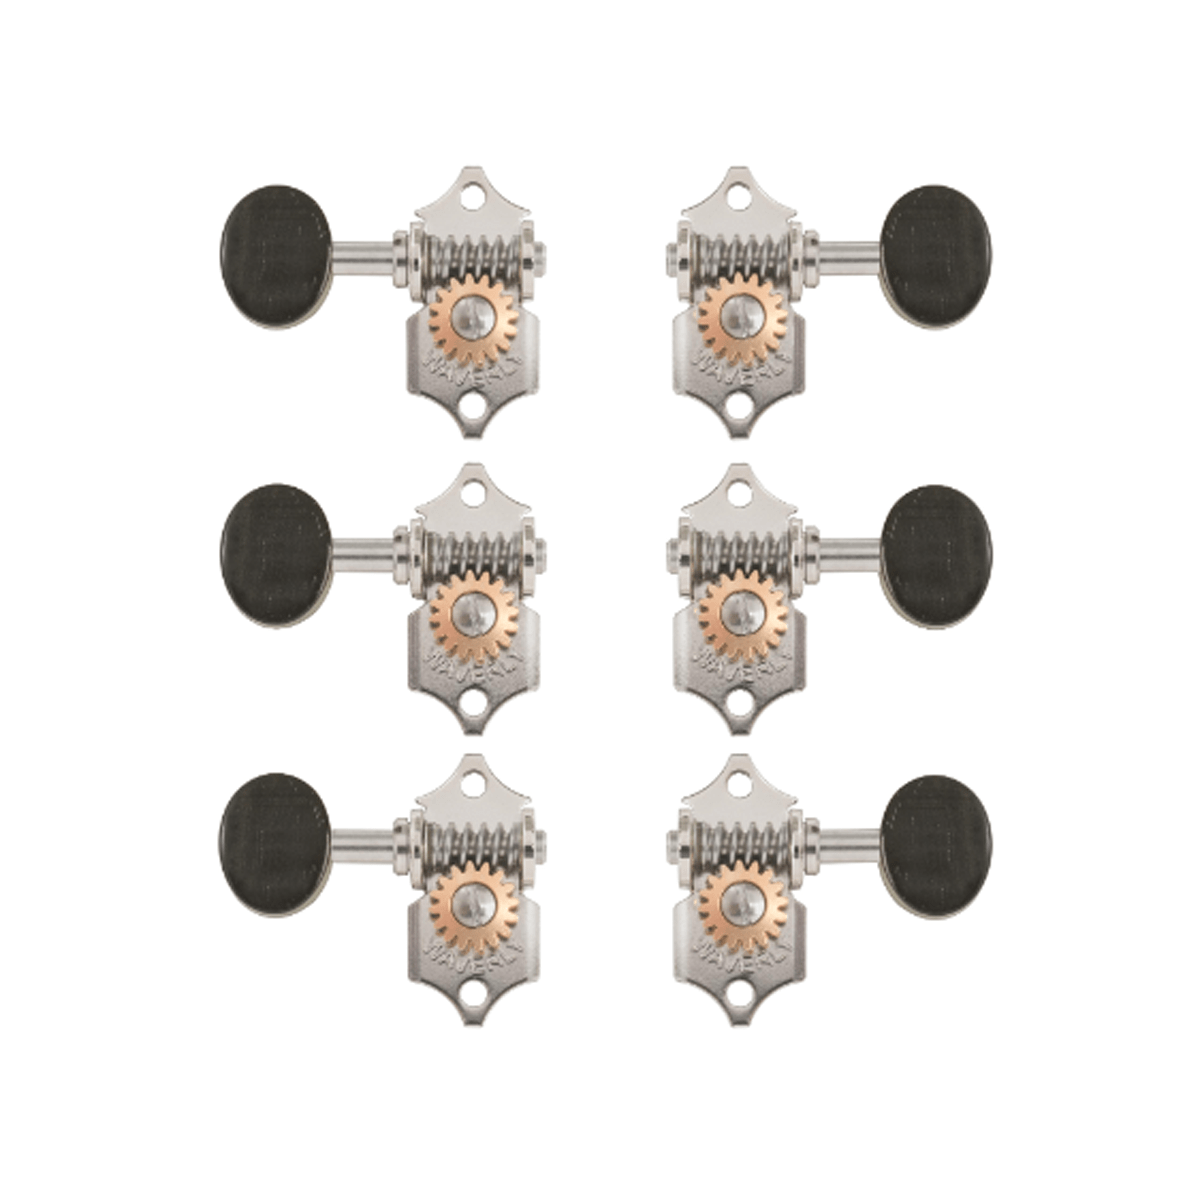 WAVERLY Home Page Waverly Machine Head Guitar Tuners - 4067 Nickel 3-a-side - Byron Music